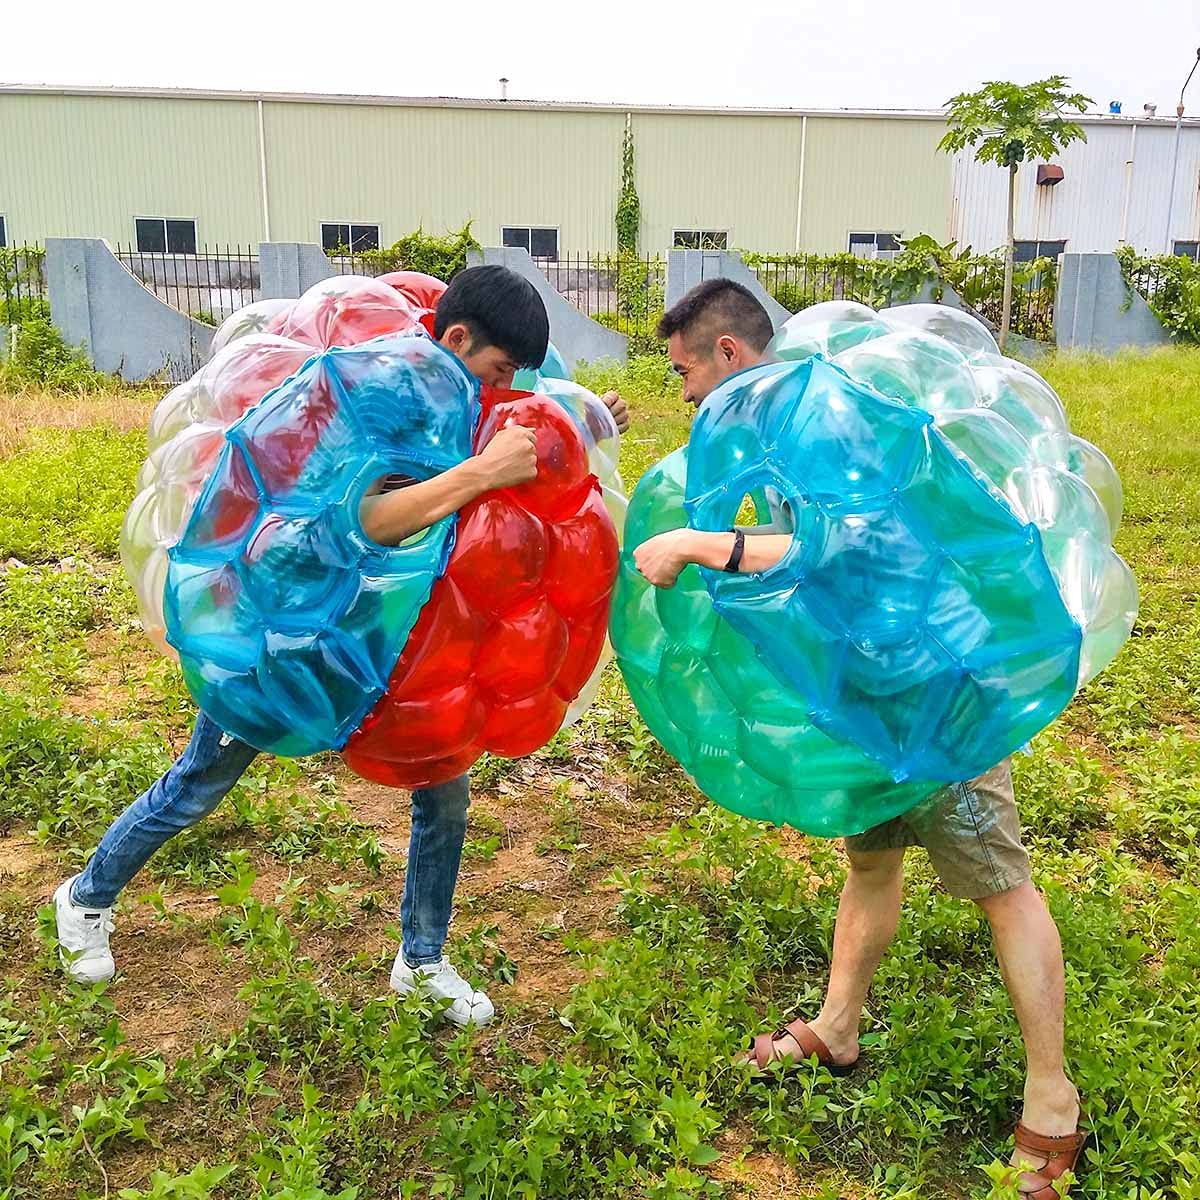 2 adults outdoors wearing giant inflatable bubble balls bumping into each other.